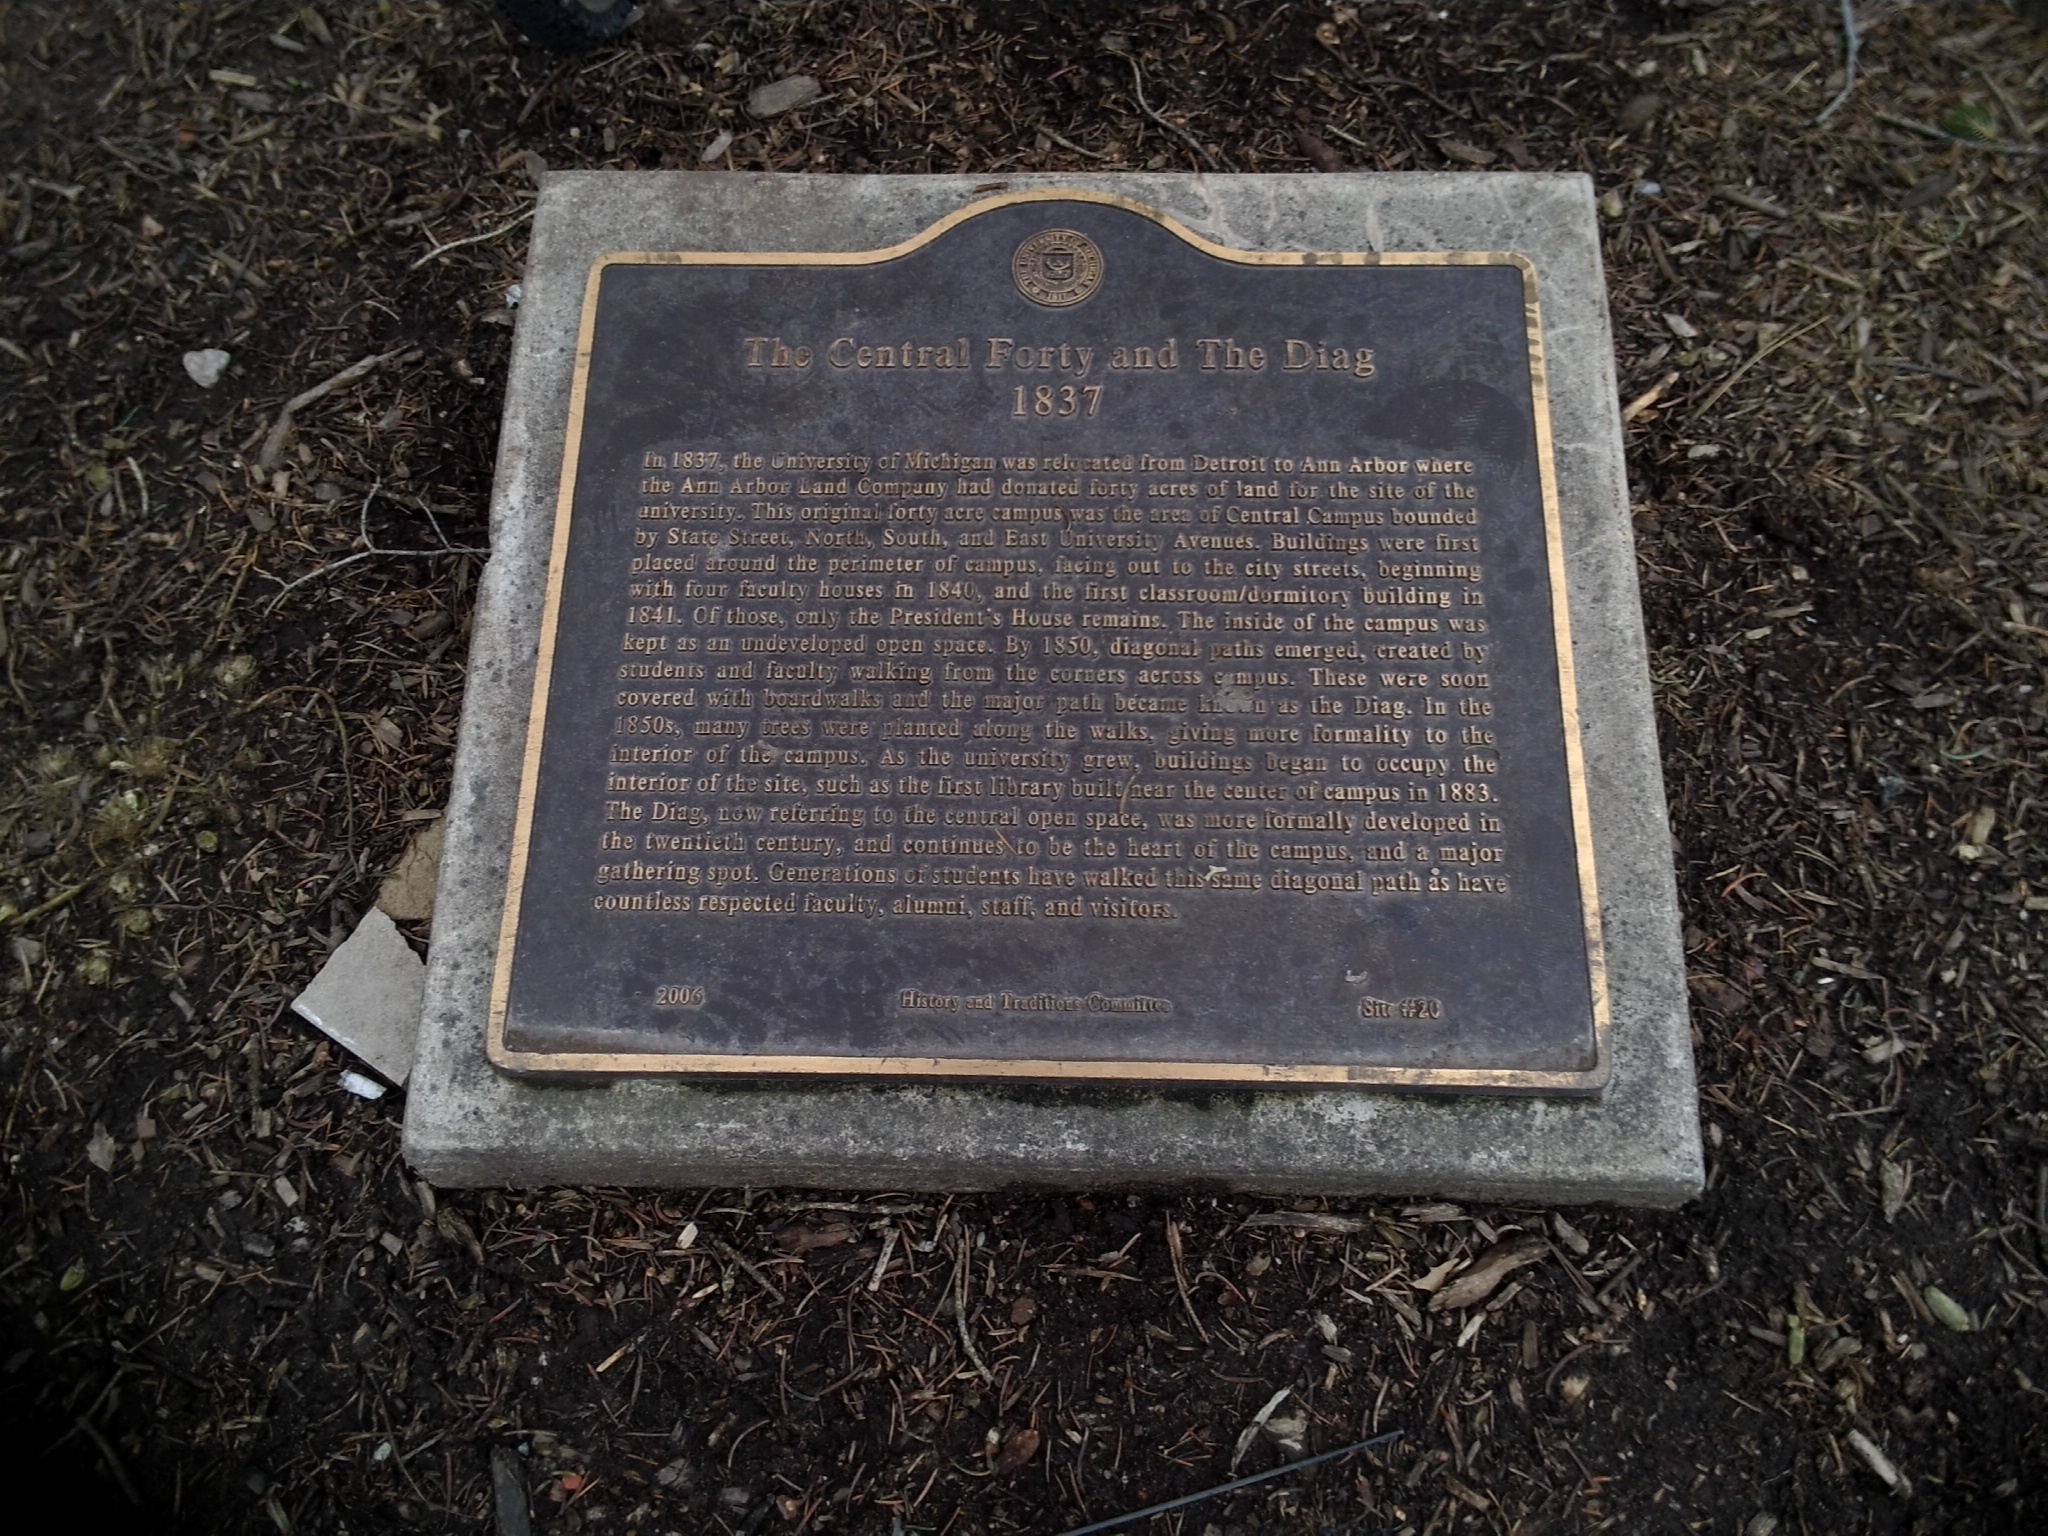 The Central Forty and The Diag Marker